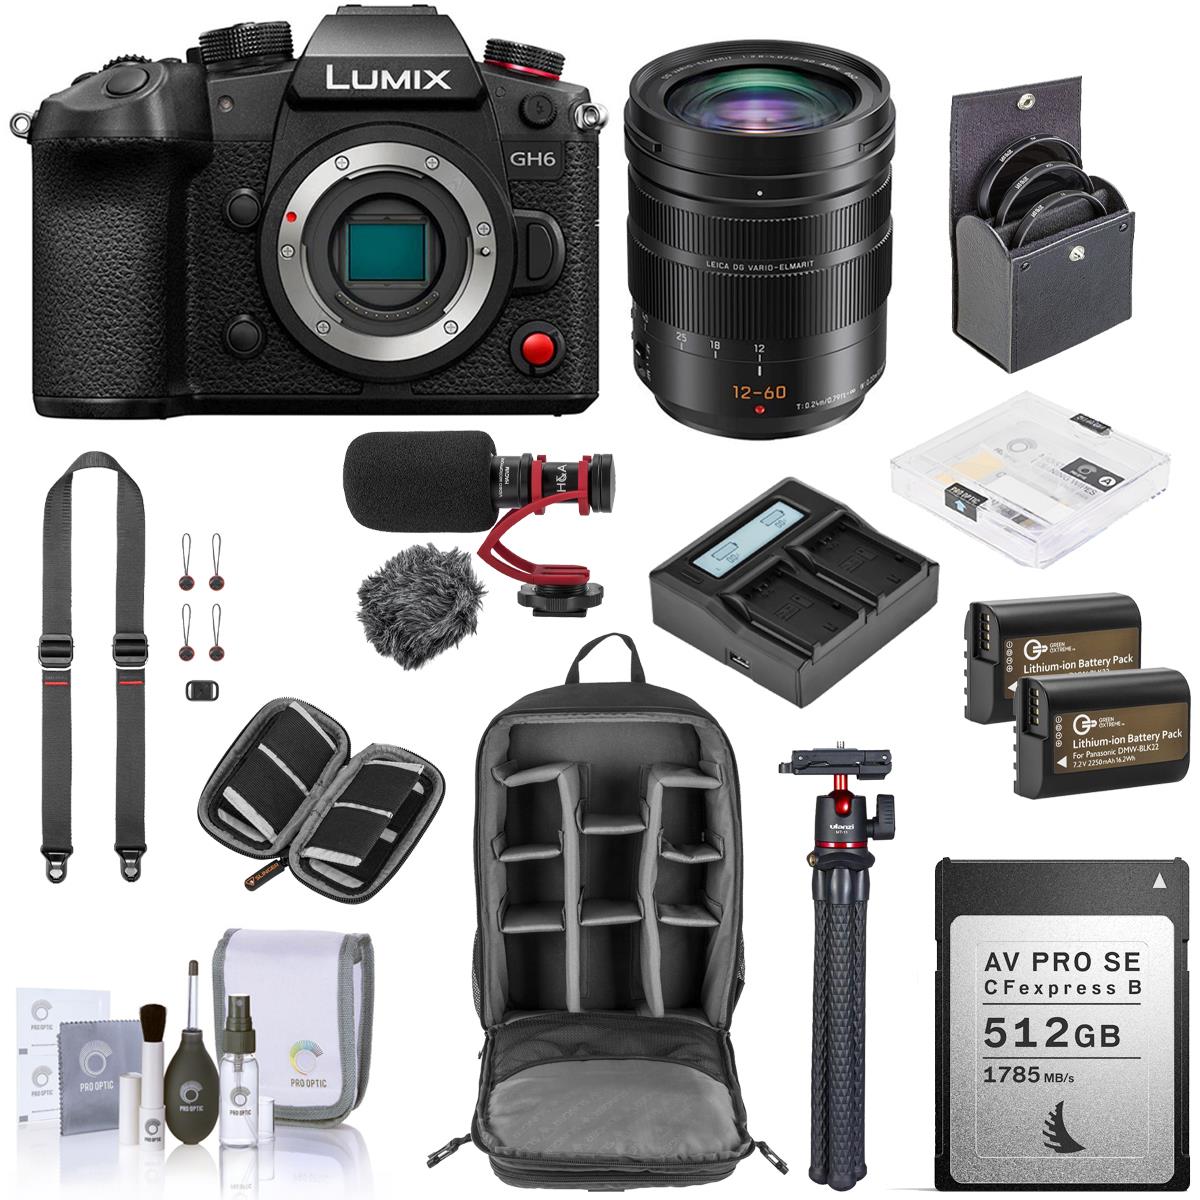 Panasonic Lumix GH6 Mirrorless Camera with 12-60mm Lens with Complete Acc. Kit